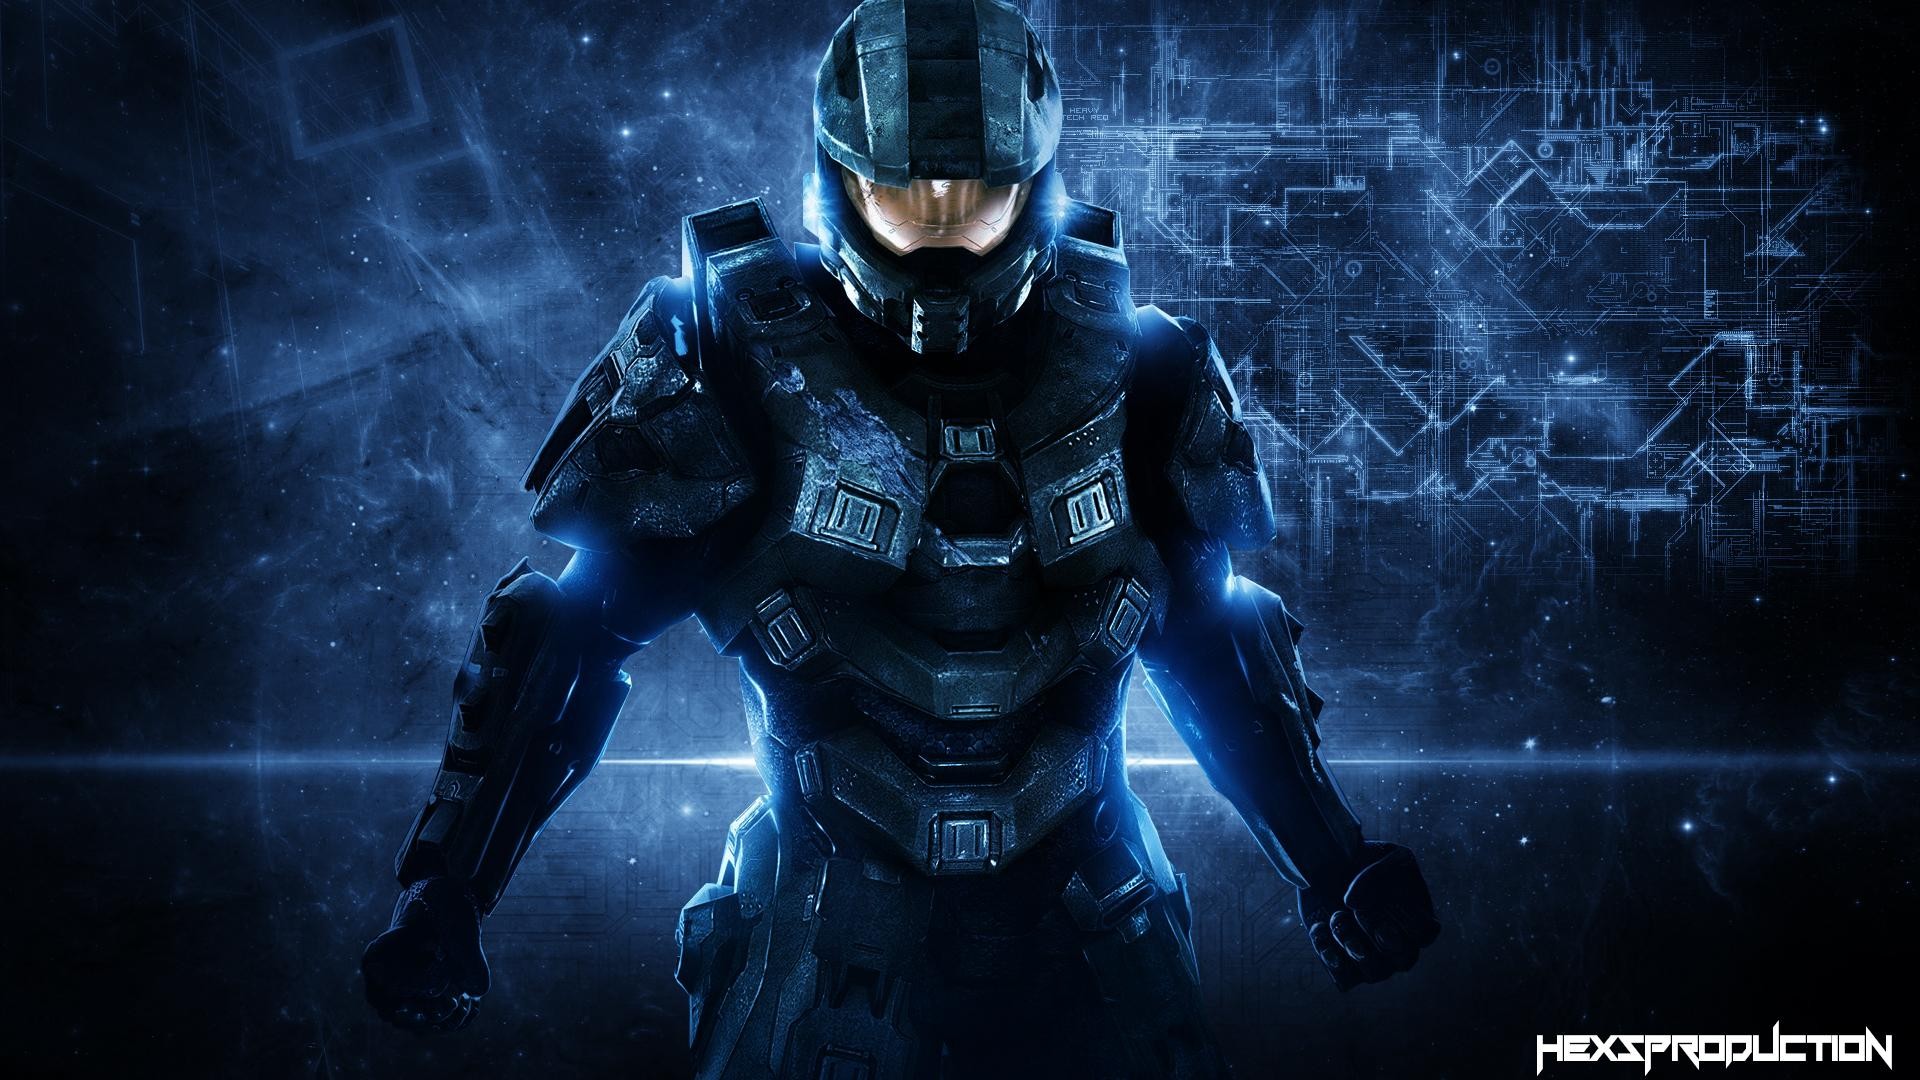 Halo, Halo 4, Master Chief, Spartans, Video Games Wallpapers HD